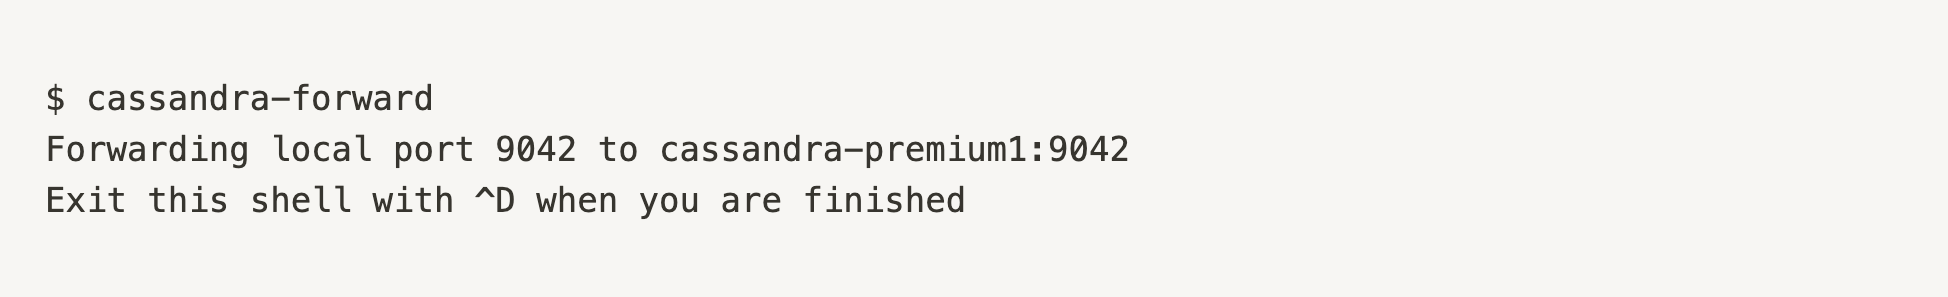 $ cassandra-forward
Forwarding local port 9042 to cassandra-premium1:9042
Exit this shell with ^D when you are finished